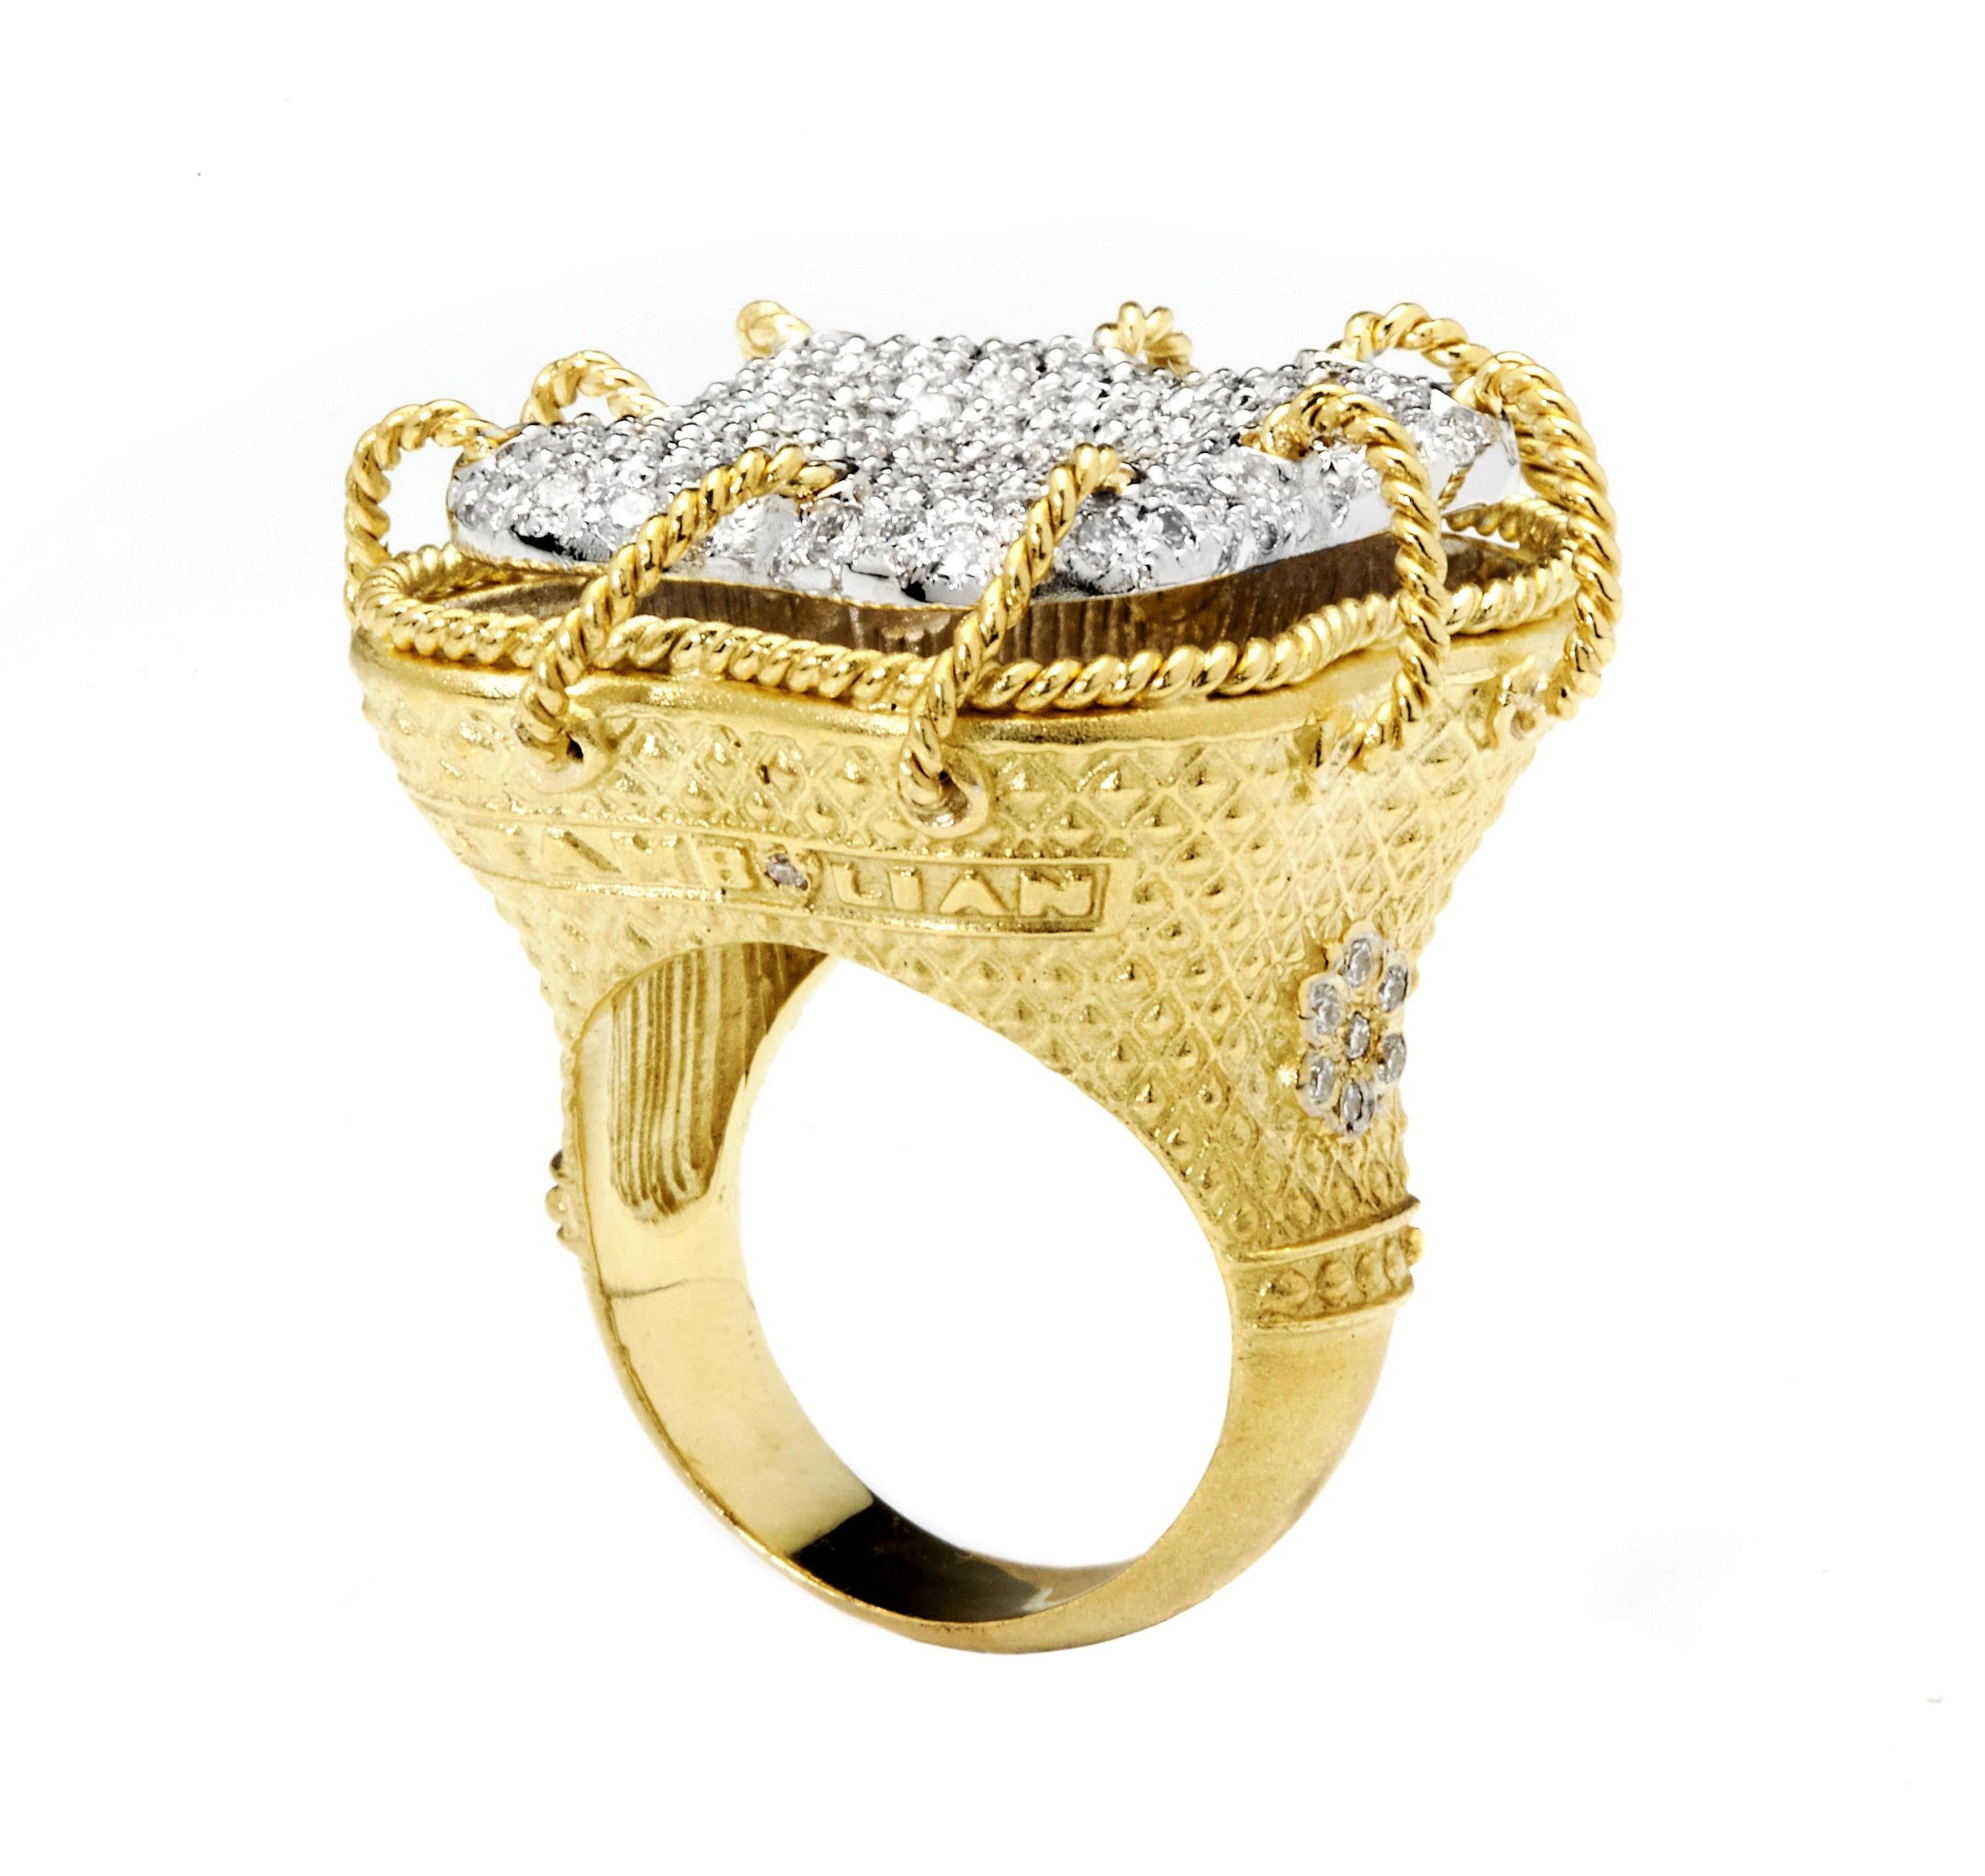 Stambolian 18 Karat Yellow White Gold Pavé Set Diamonds Large Dome Cocktail Ring

This ring is from the Stambolian 